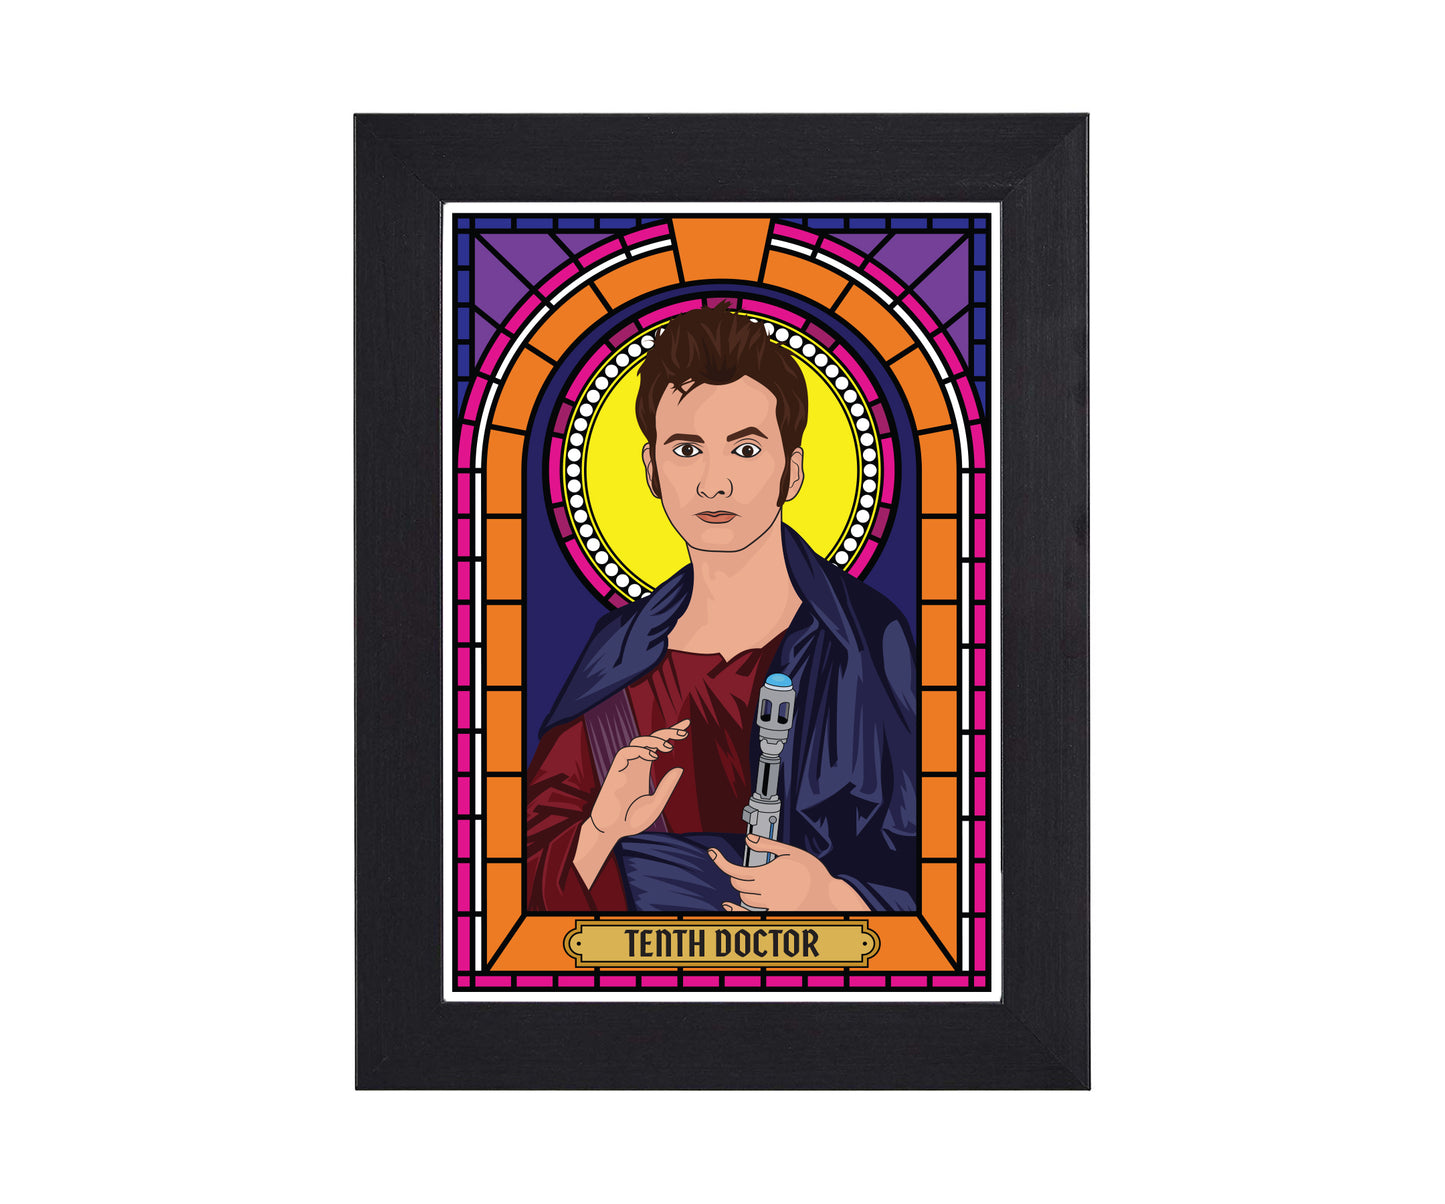 The Doctor Illustrated Saint Print Series